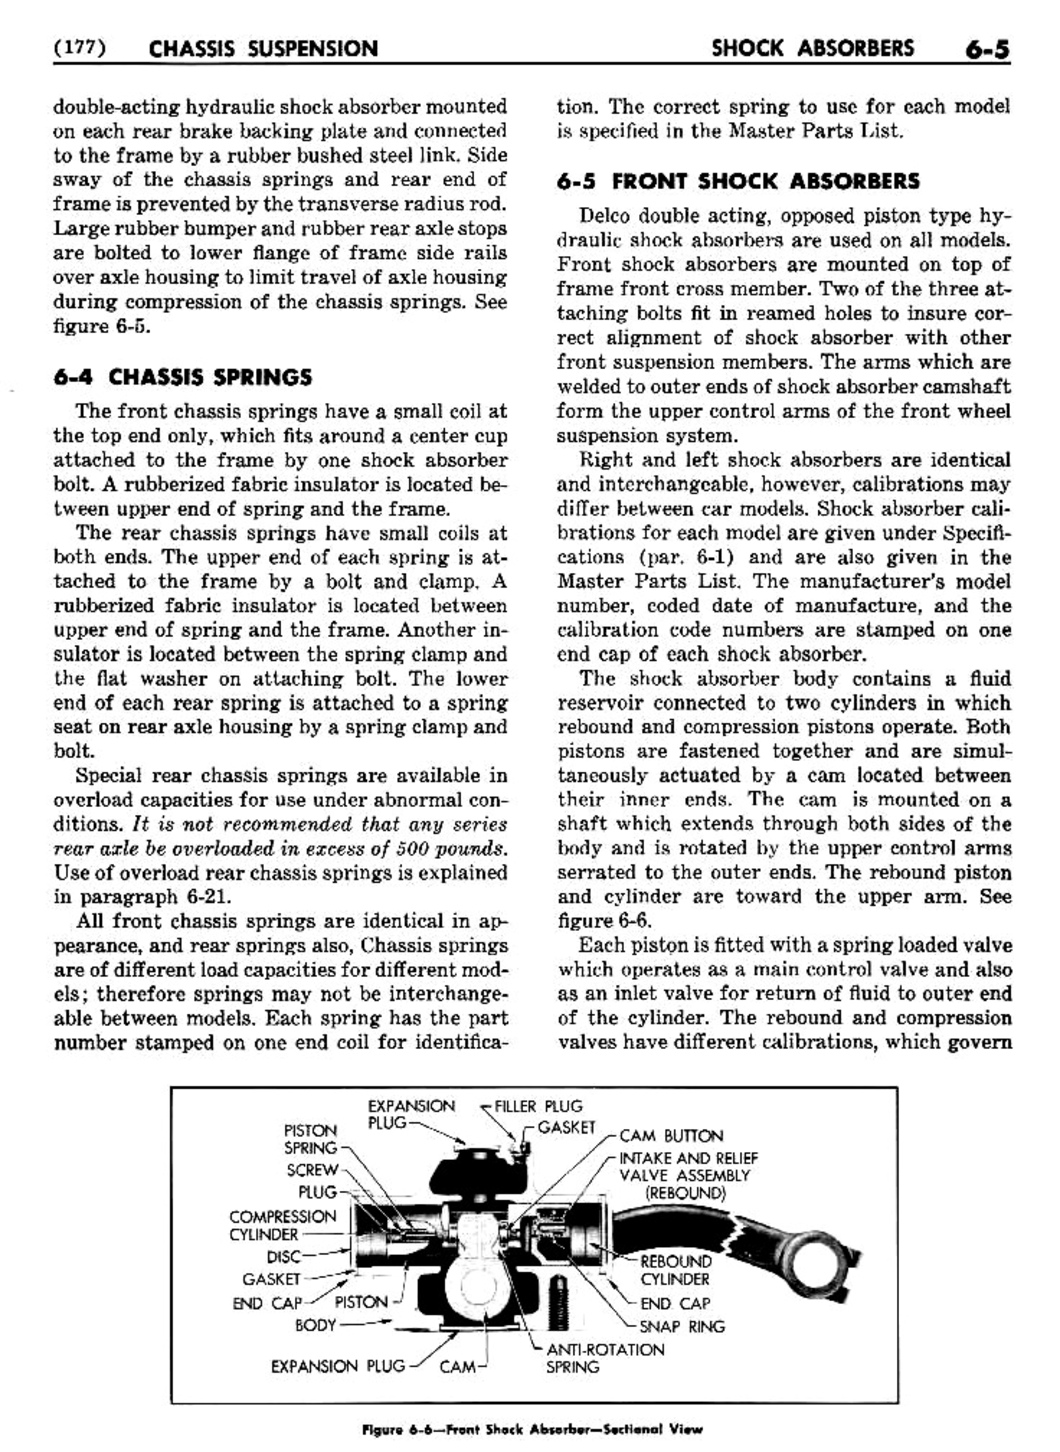 n_07 1950 Buick Shop Manual - Chassis Suspension-005-005.jpg